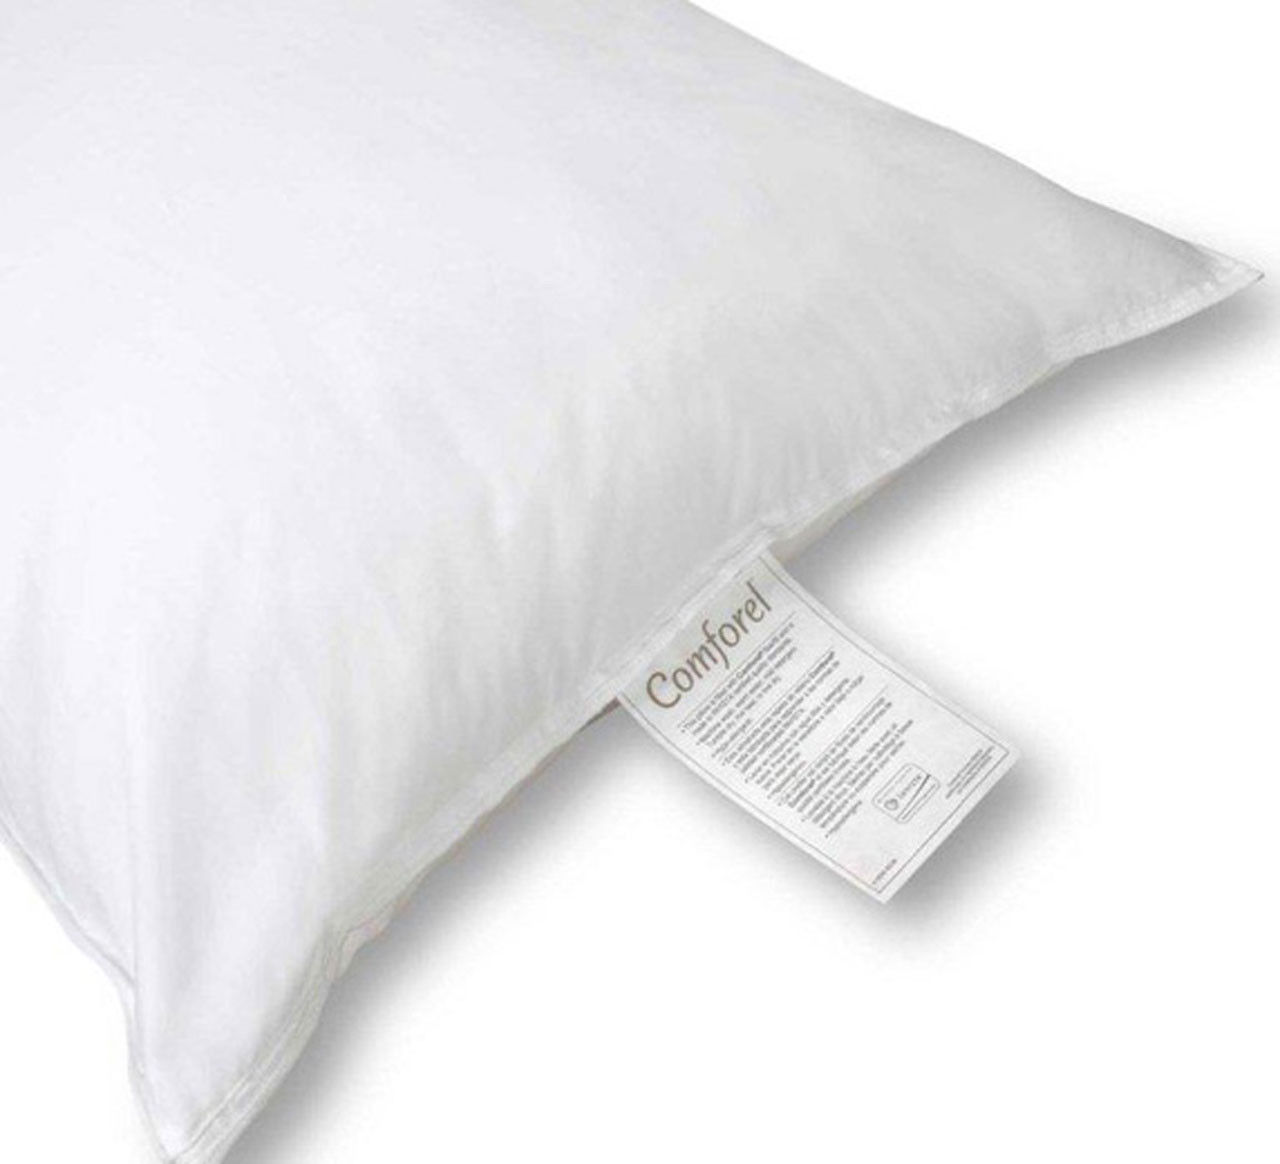 Where are the Comforel® pillows manufactured?